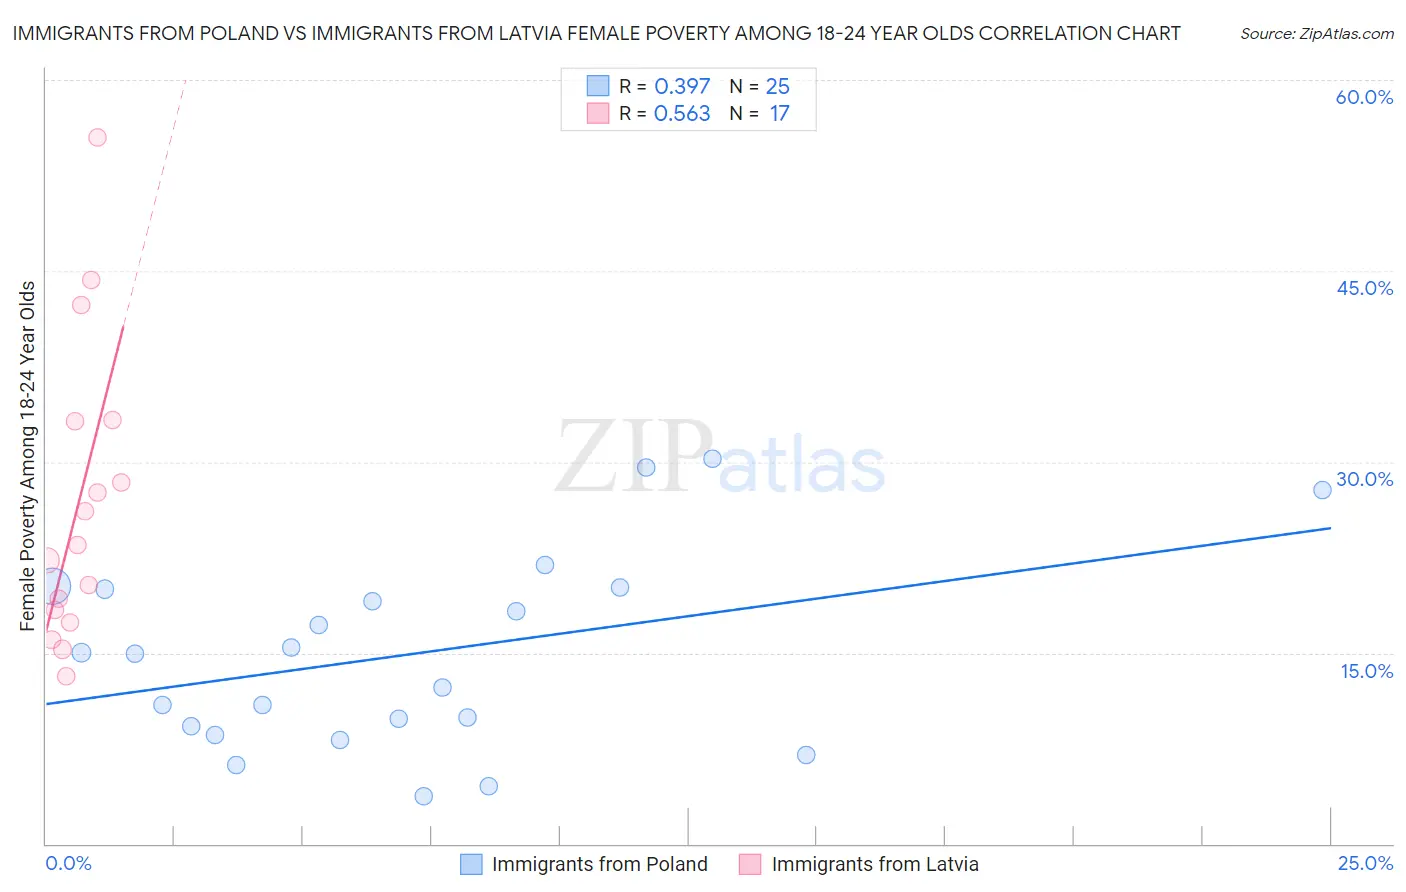 Immigrants from Poland vs Immigrants from Latvia Female Poverty Among 18-24 Year Olds